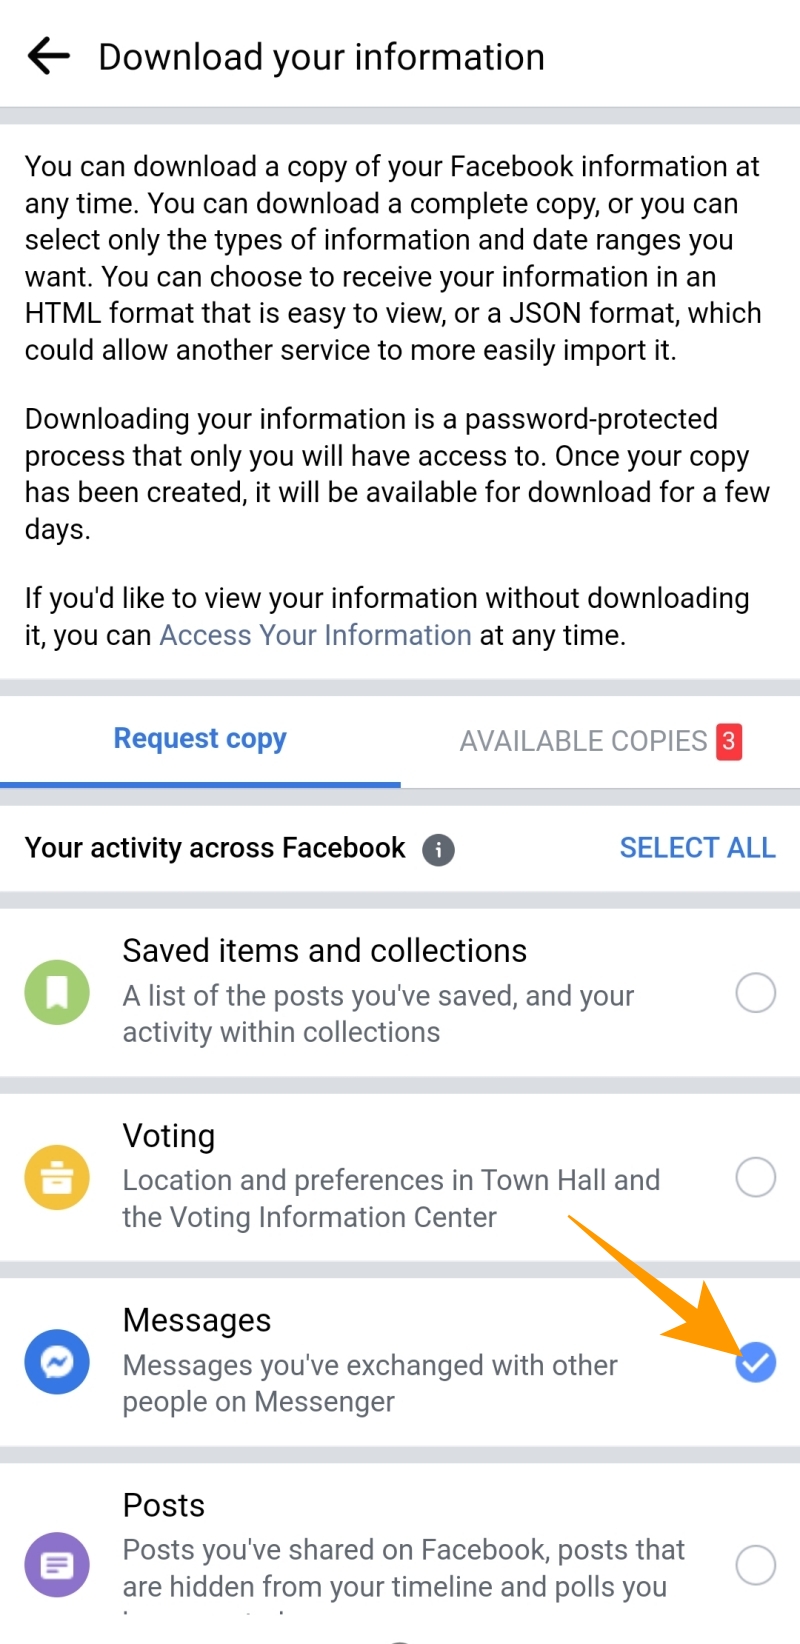 Request copy options under Download your information